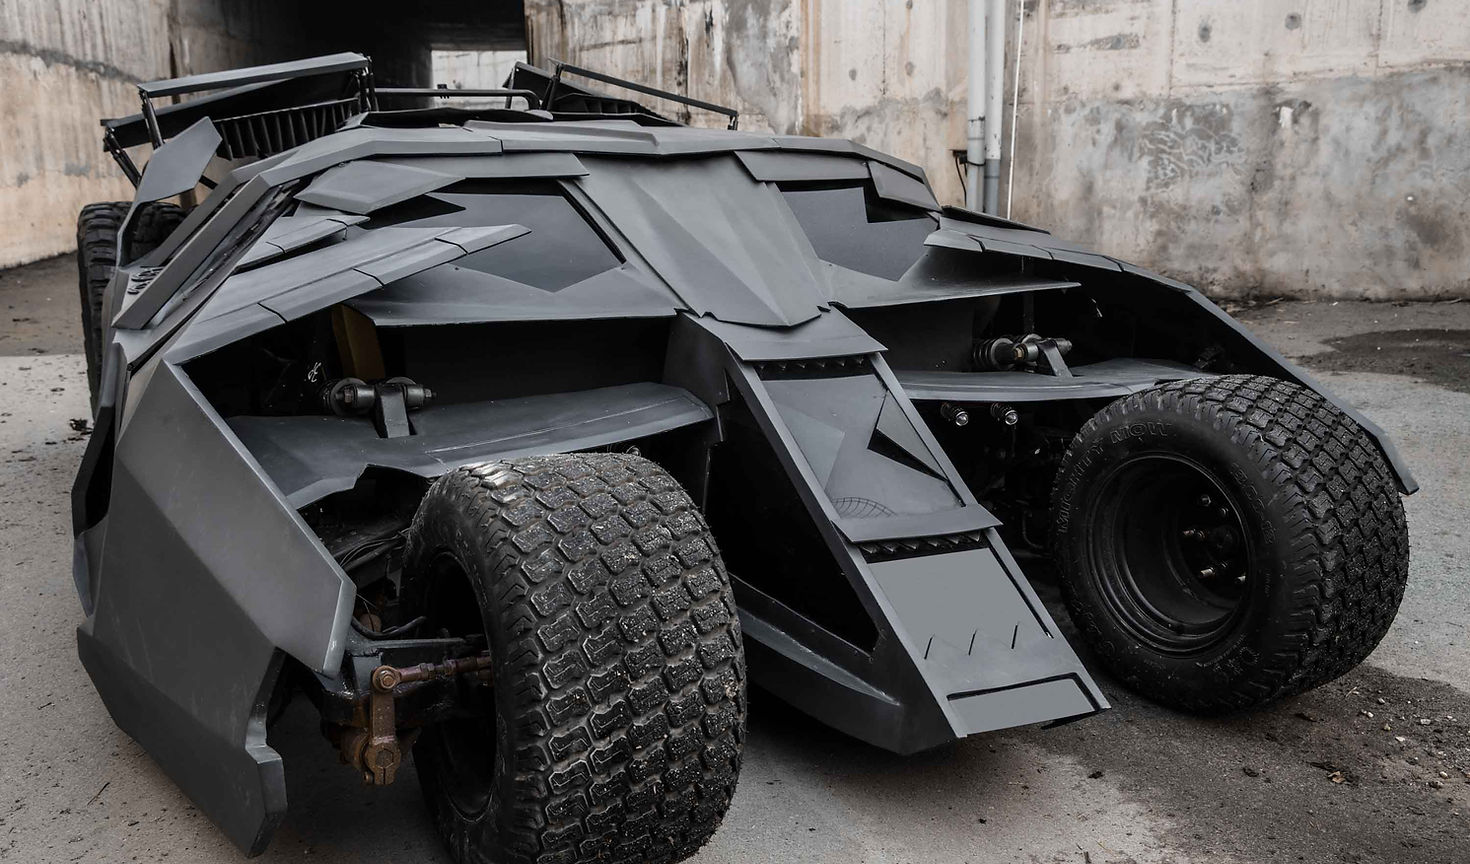 5 supremely expensive cars that look like Batmobile and cost tens